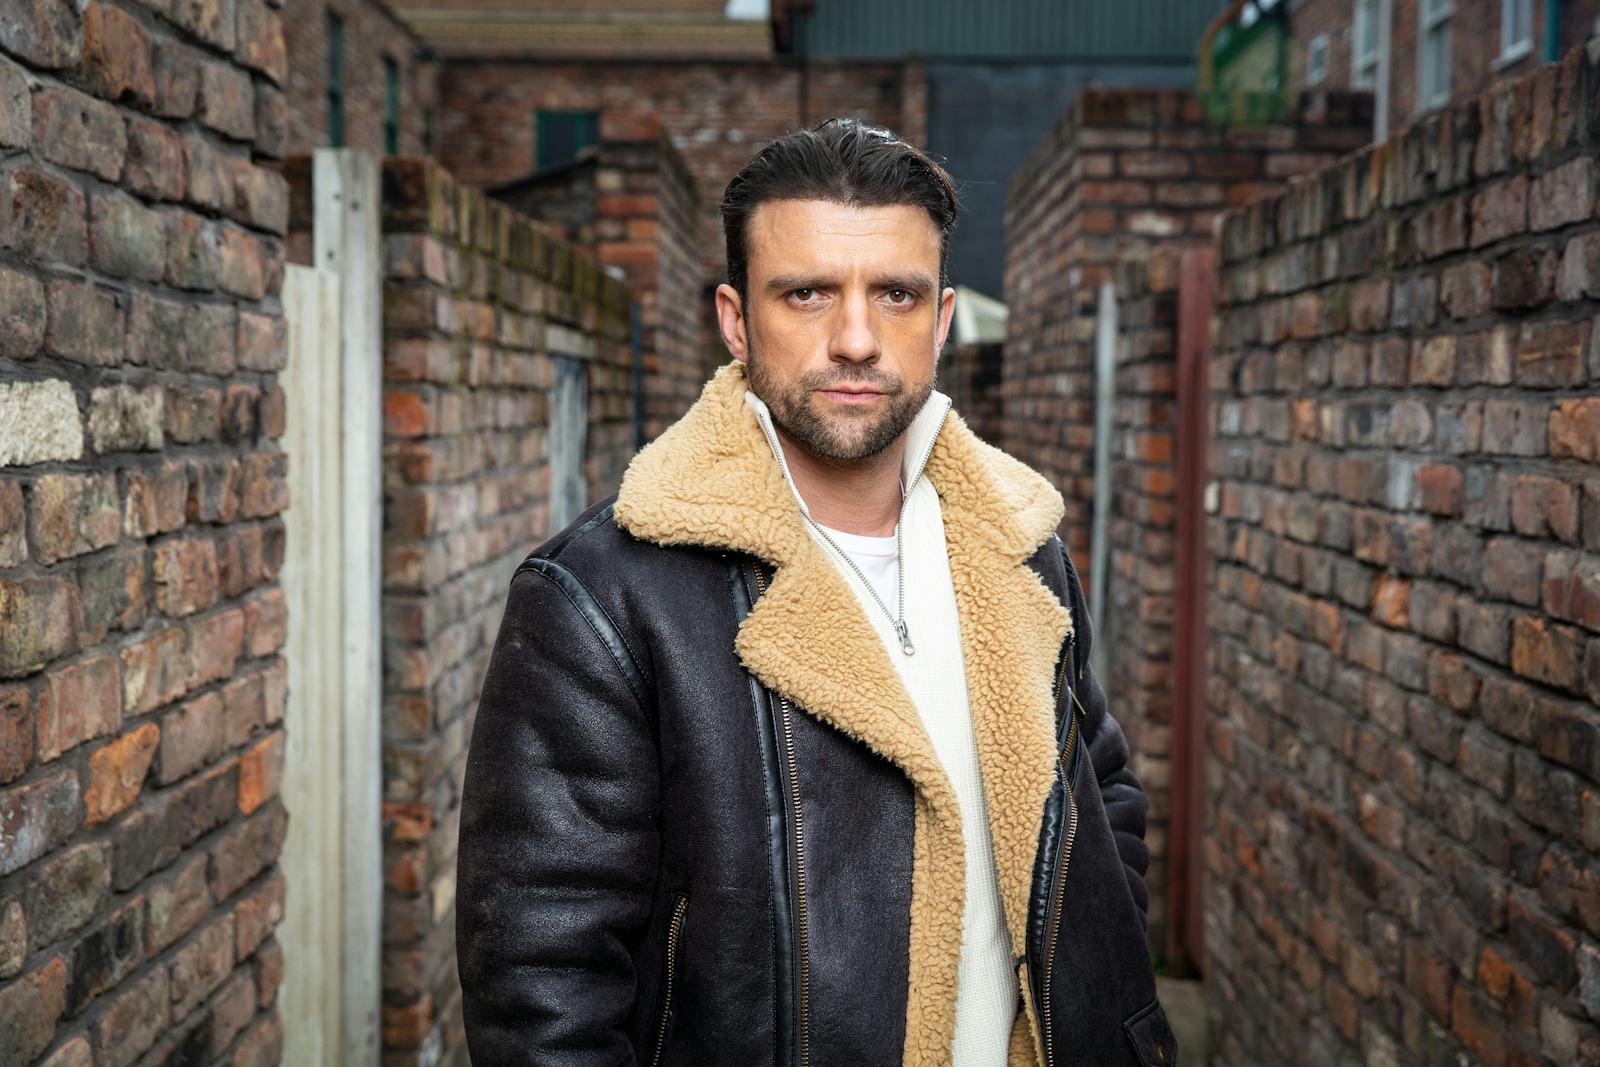 Ciarán Griffiths Instagram, Age, Career, & More On Returning ‘Corrie